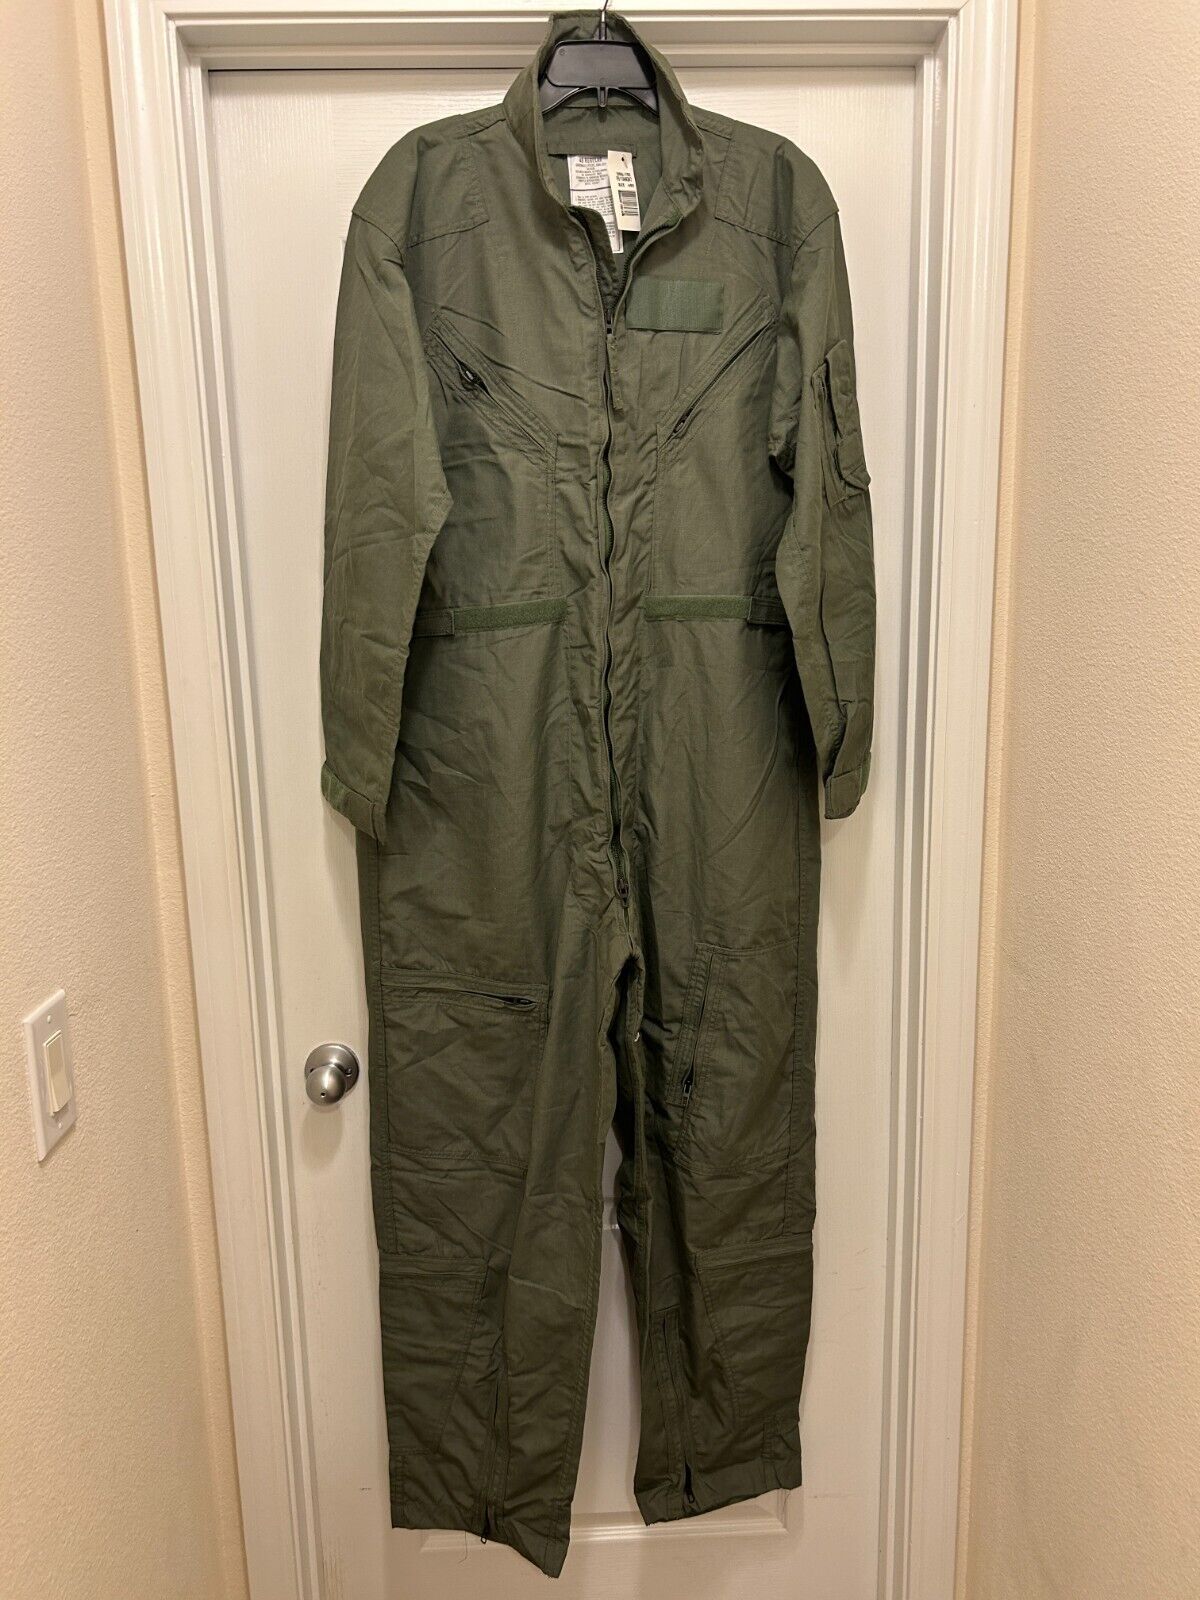 NWT Green Military Flyers Summer Fire Resistant Coveralls CWU 27/P Size 48R 